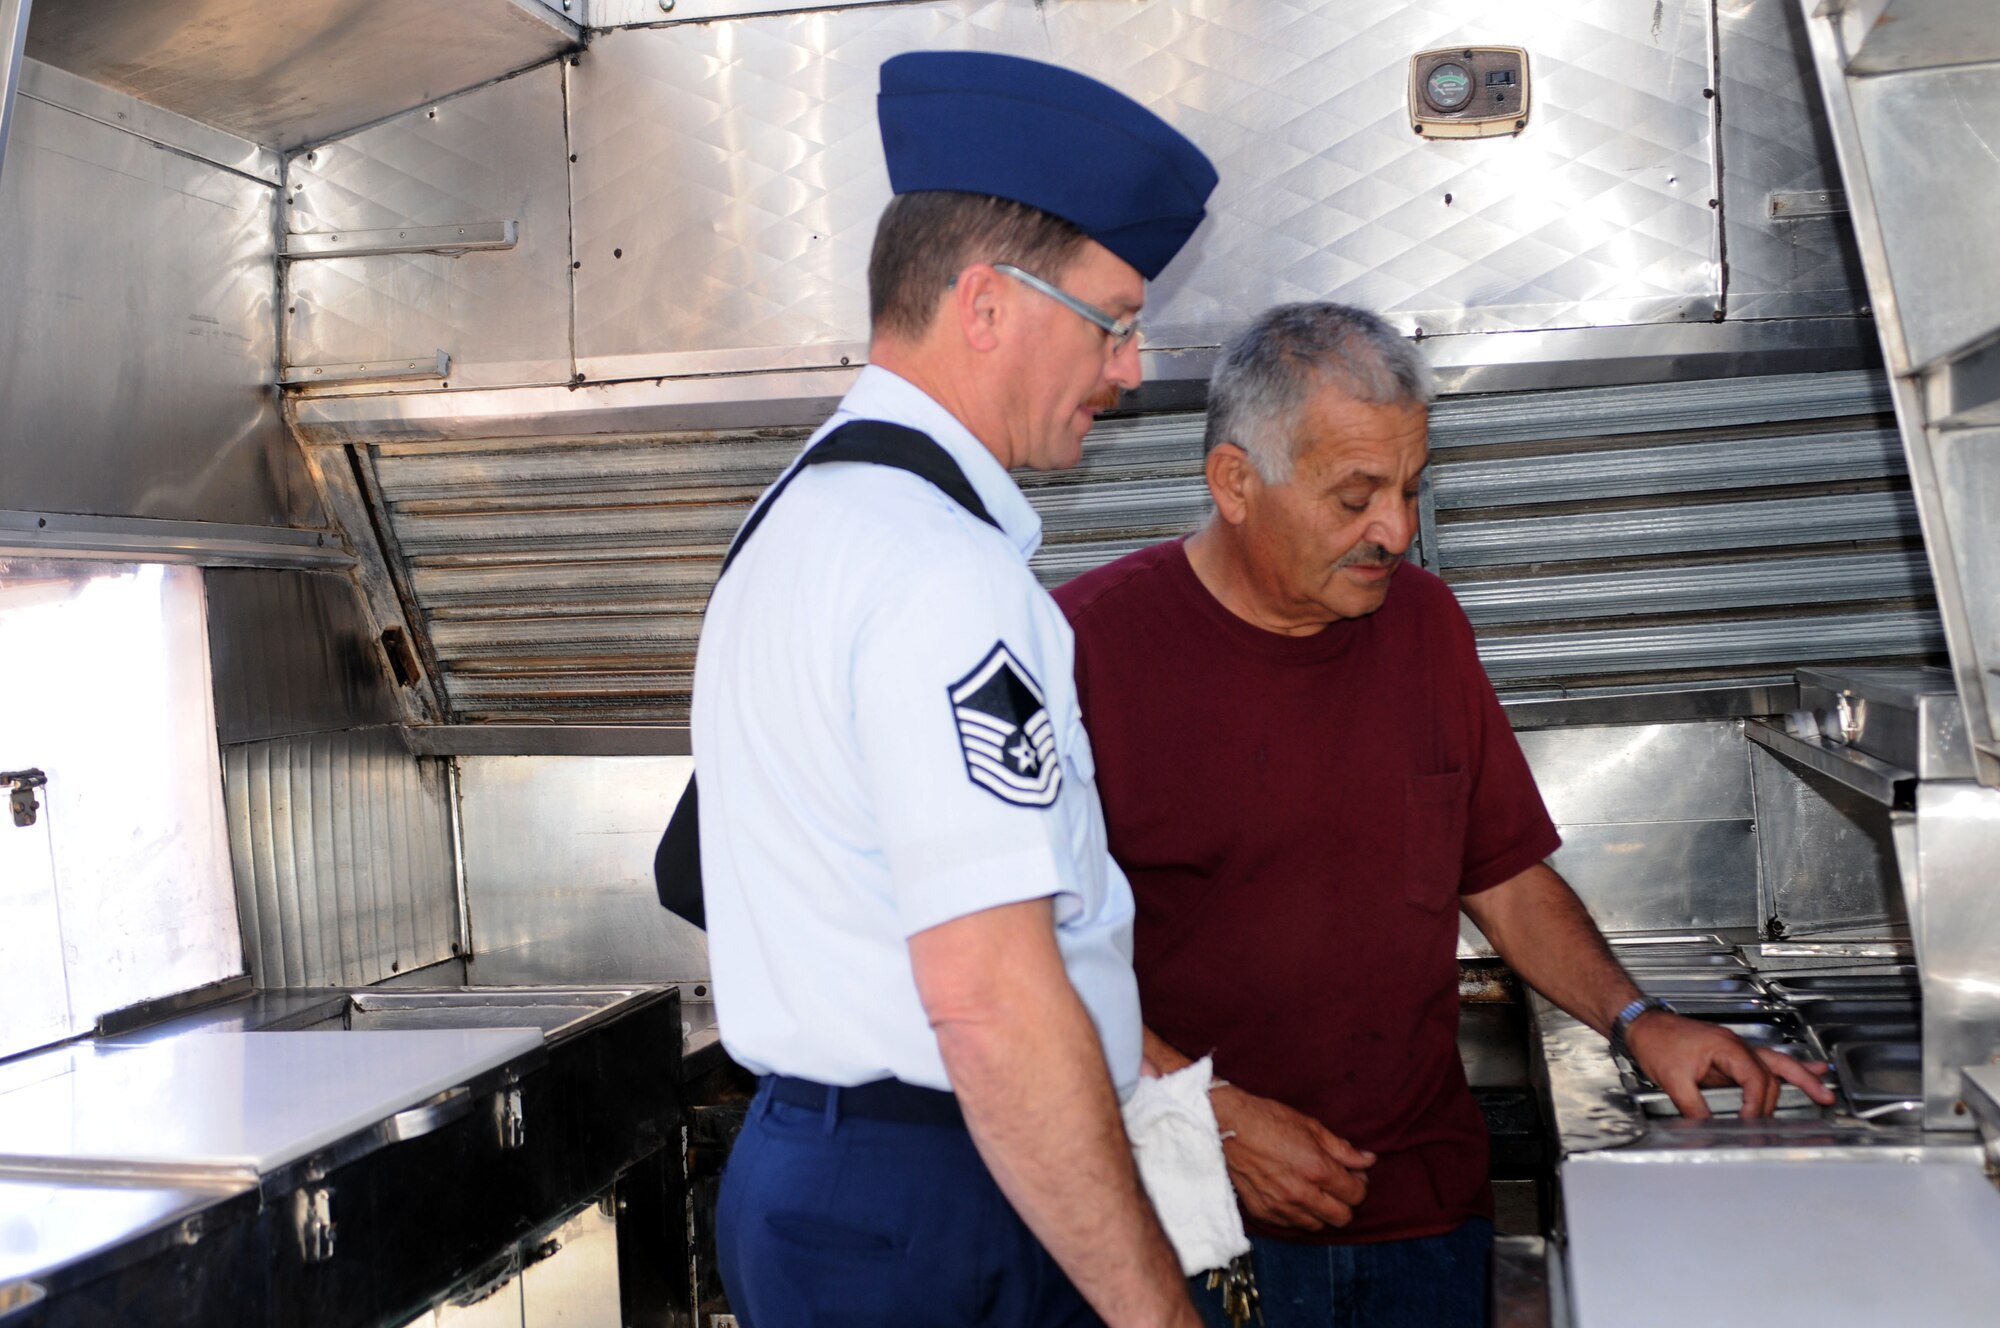 Master Sgt. Rick Talvy completes an inspection of the mobile kitchen with “La Herradura” owner Jaime Gomez Nov. 30. Gomez and his team will serve meals on base during the full-time work week, a first for the 162nd Fighter Wing in several years. (U.S. Air Force photo/Maj. Gabe Johnson)